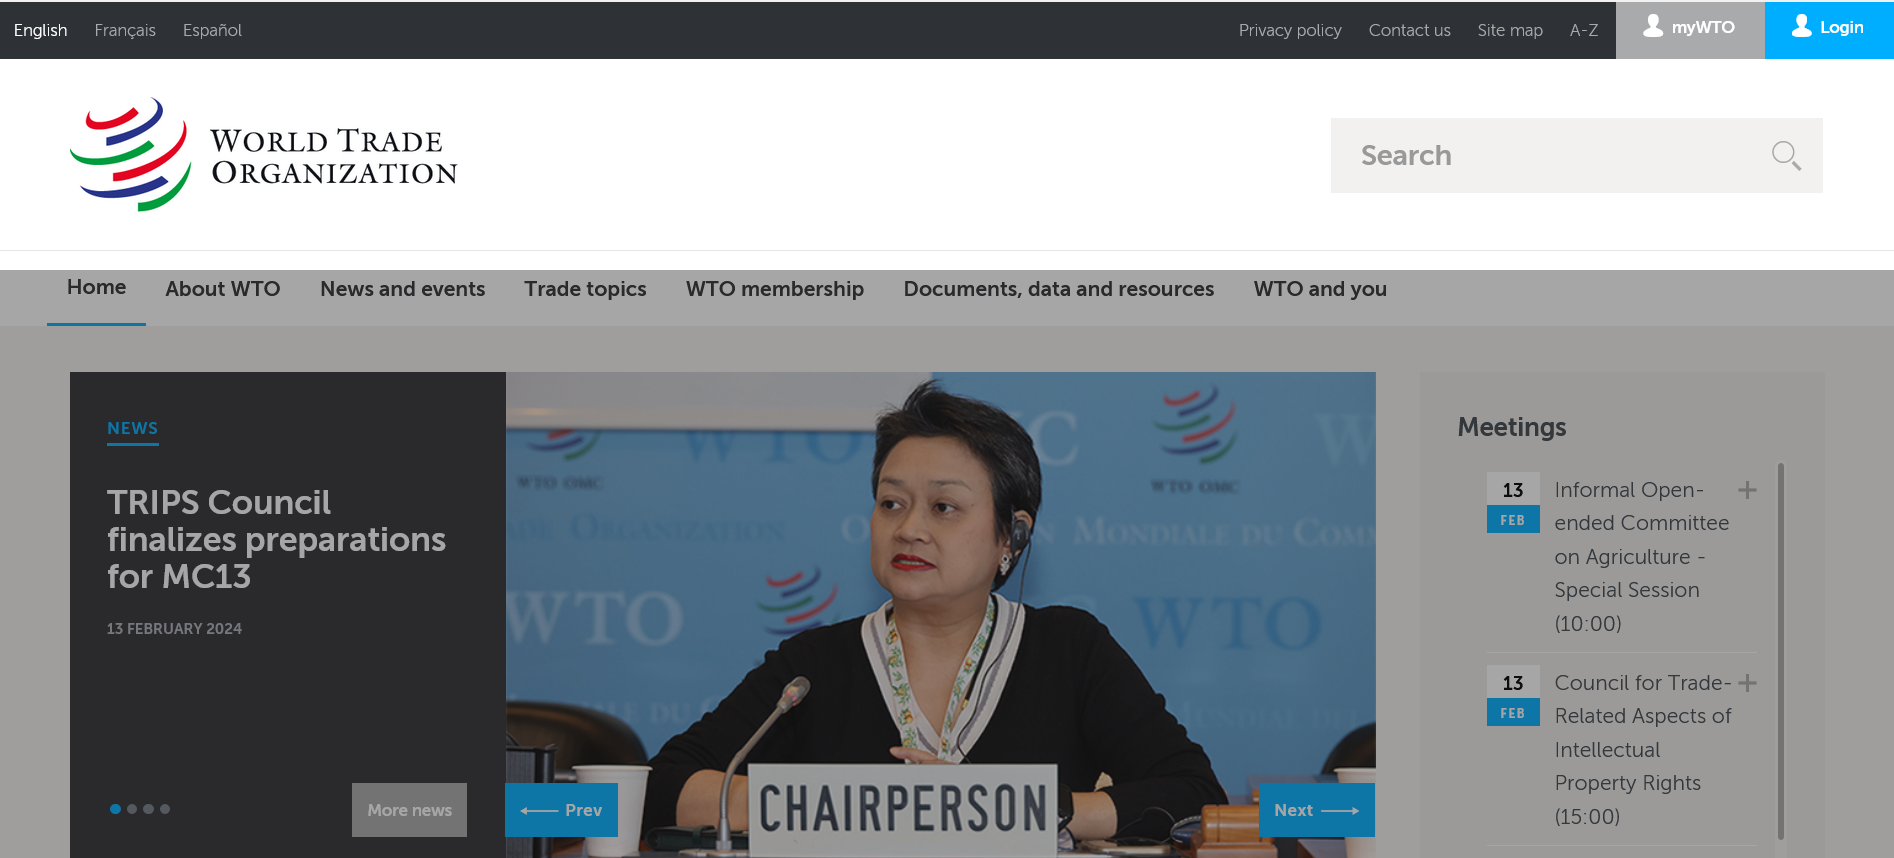 WTO Essay Award for Young Economists 2024 - Apply Now